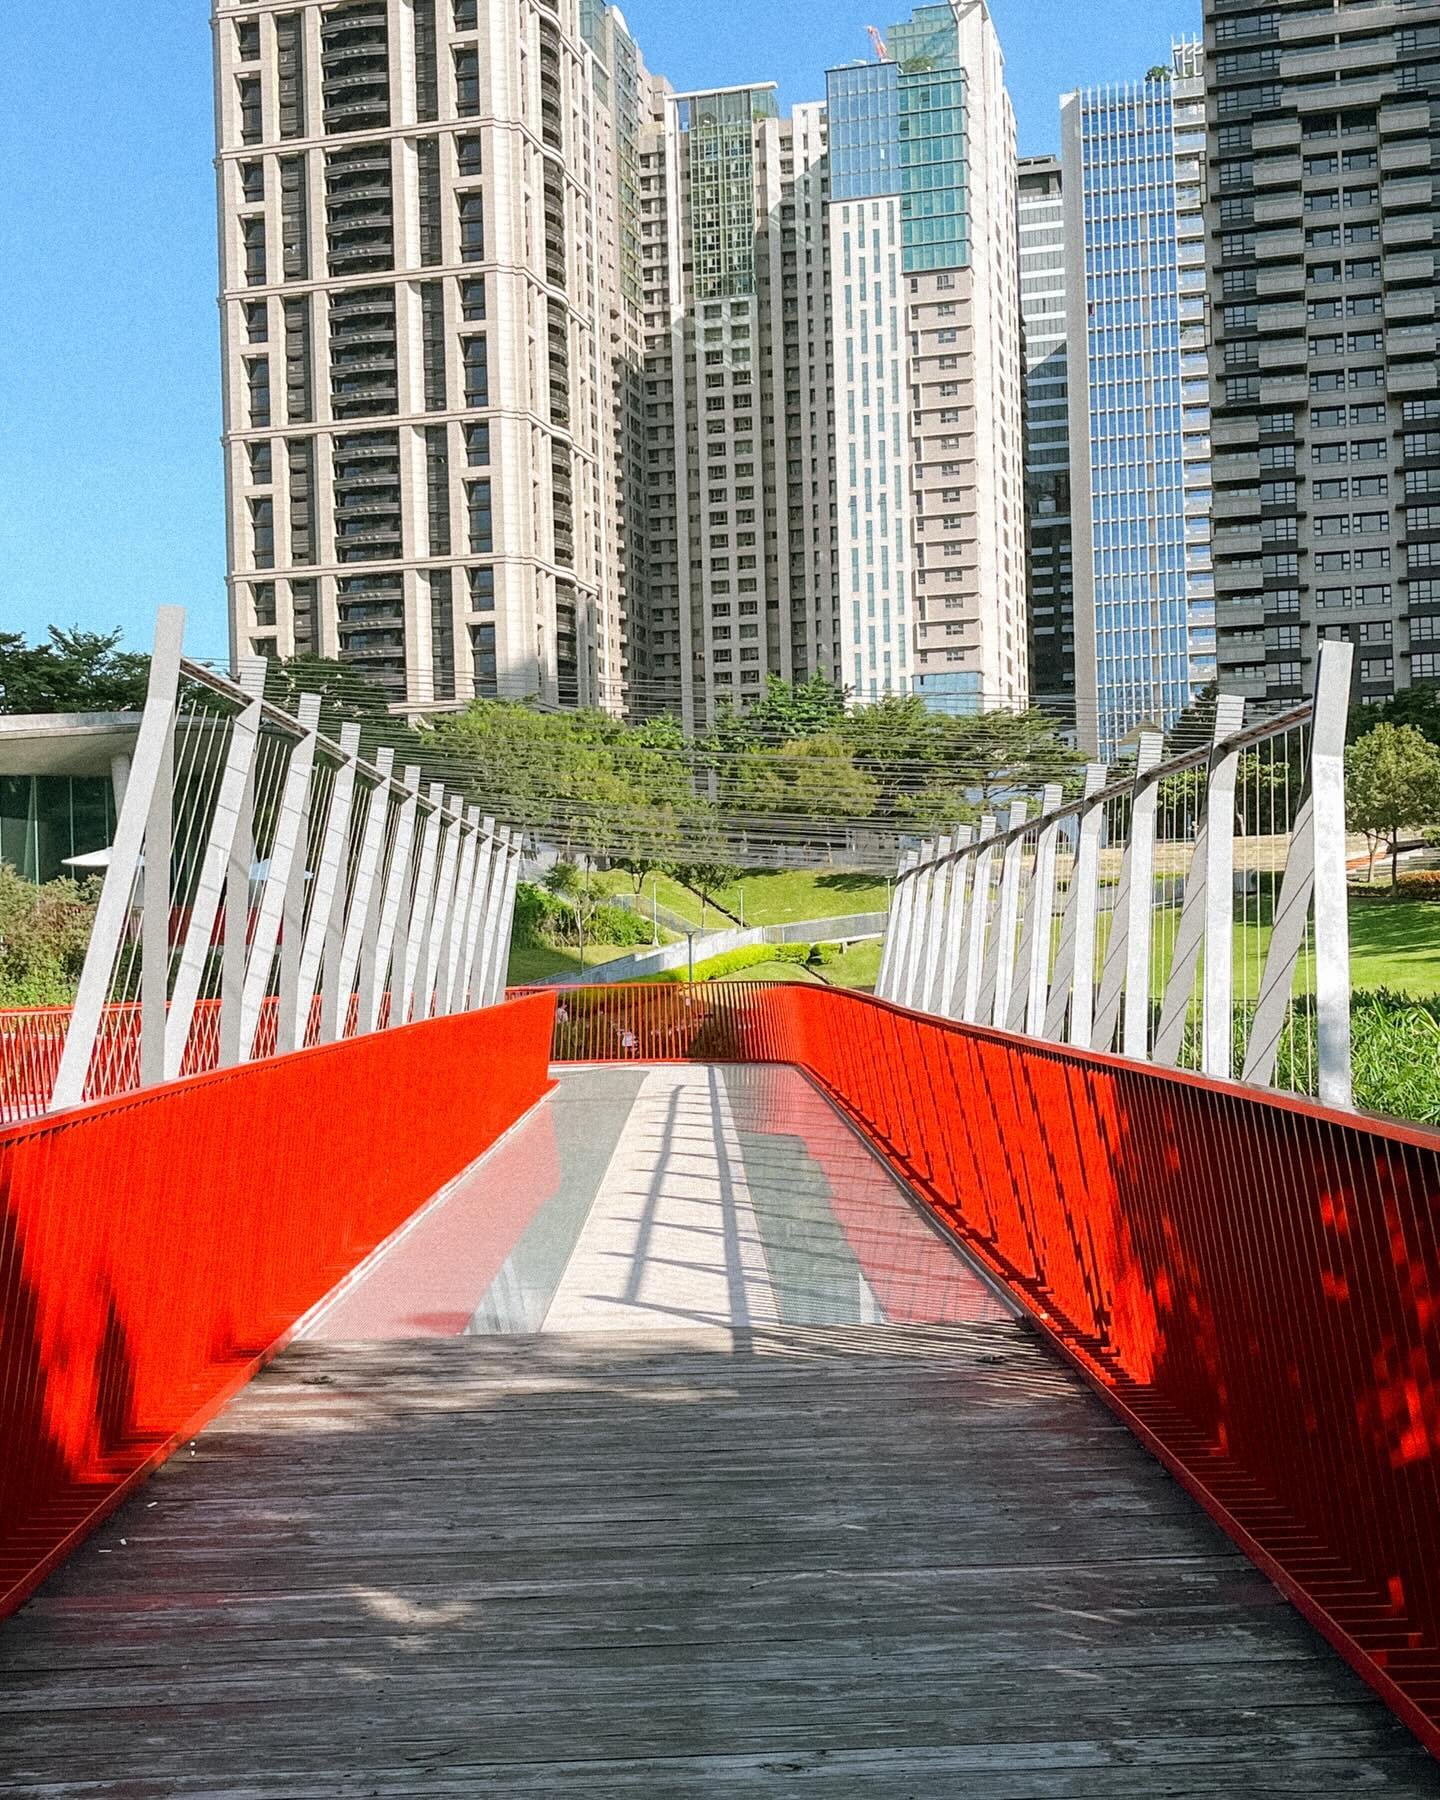 Follow the red bridge and see where it takes you #findyourzen #taichungpark